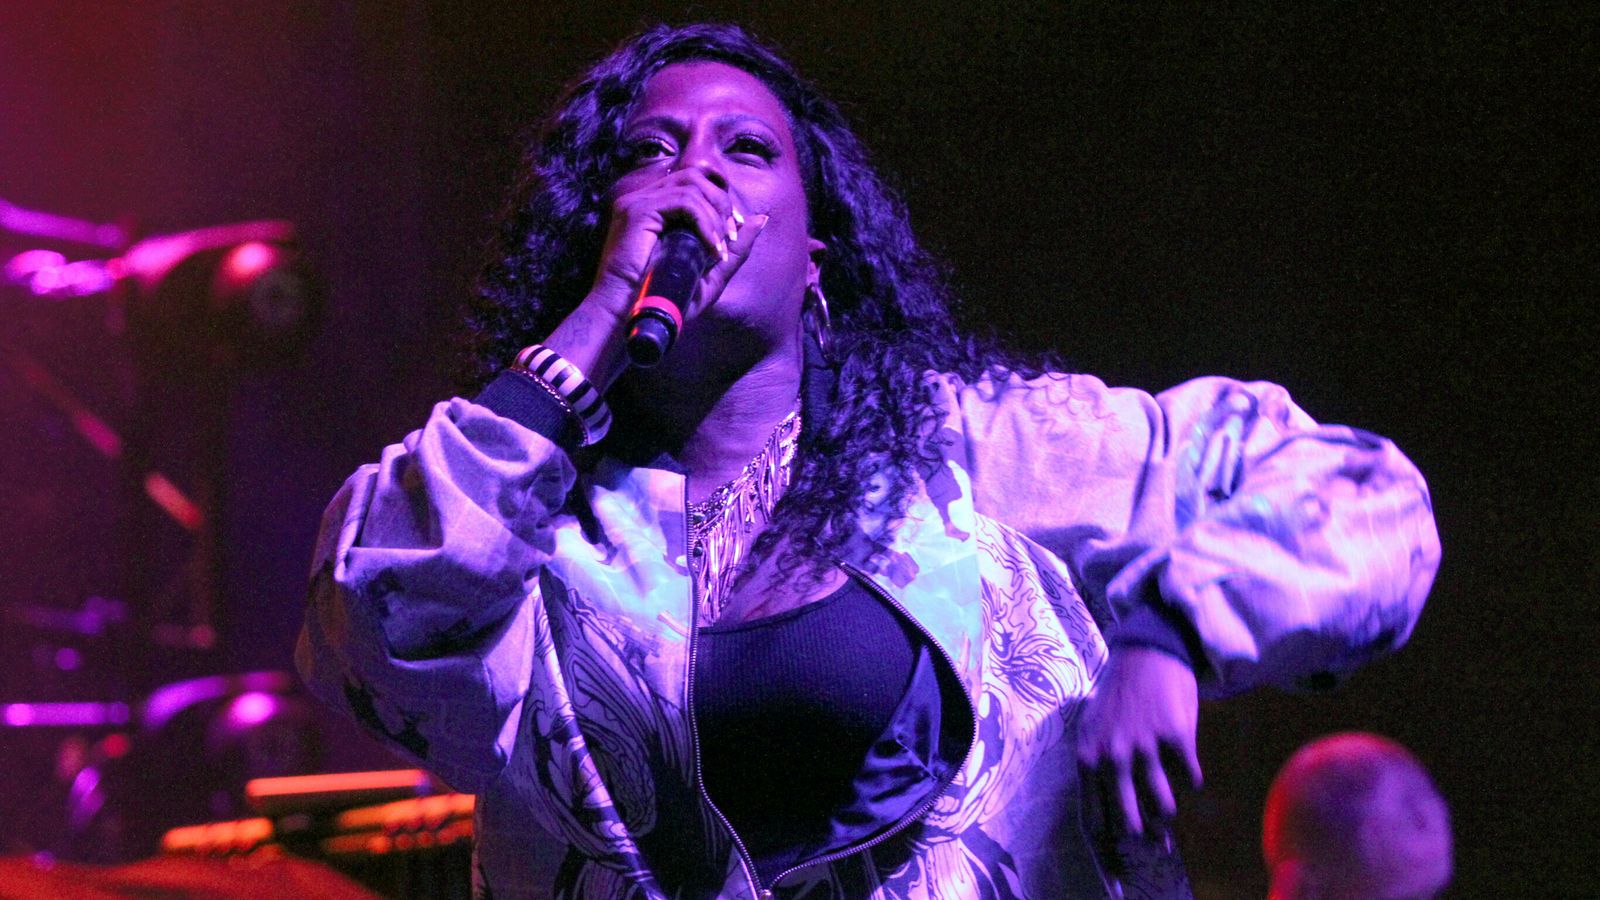 Gangsta Boo: Former Three 6 Mafia rapper who also collaborated with Eminem, OutKast and more, dies aged 43